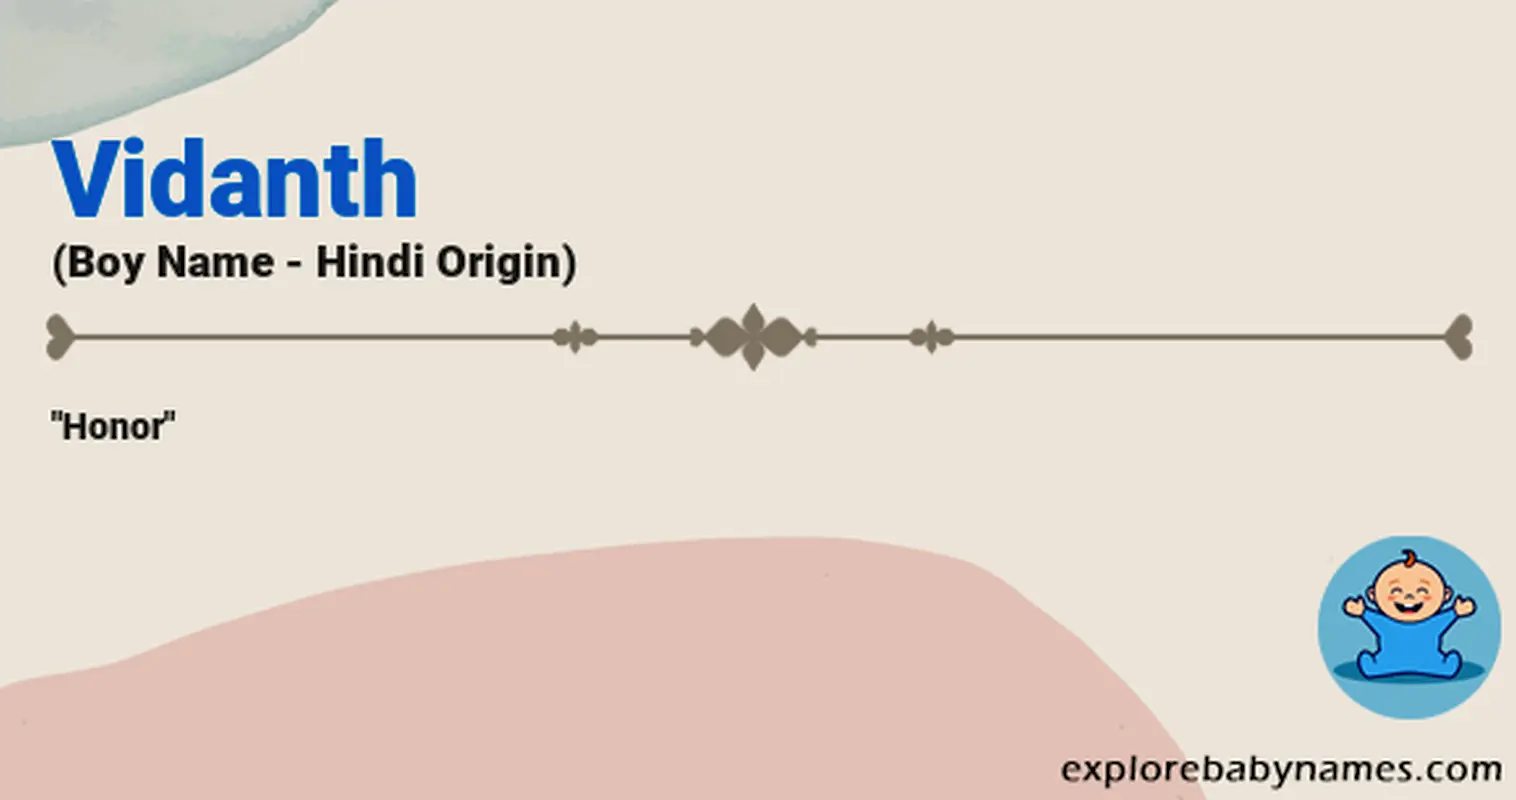 Meaning of Vidanth